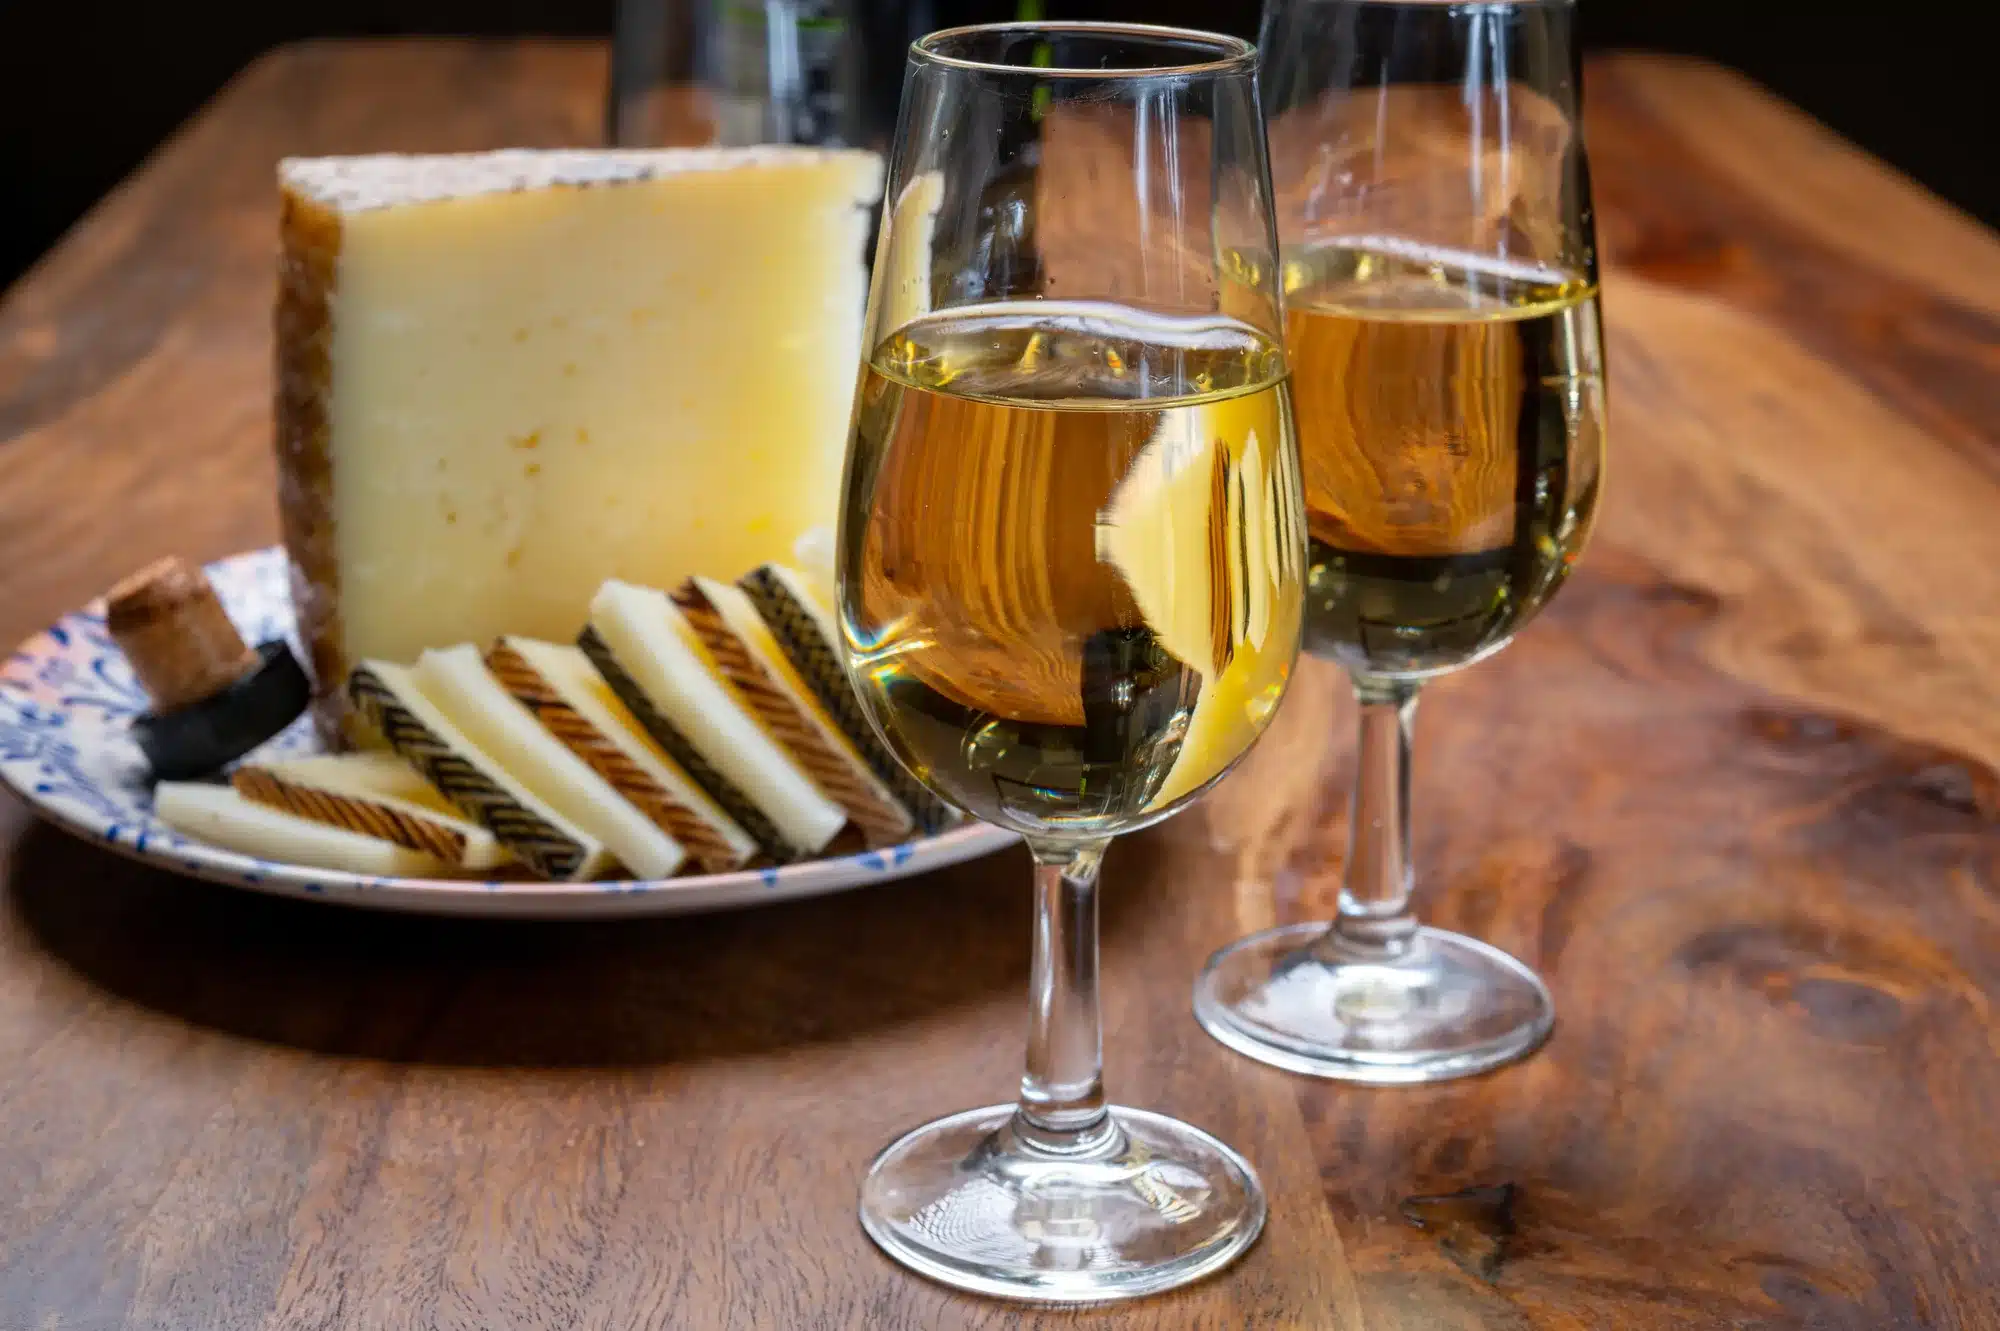 Spanish fino dry sherry wine from Andalusia and pieces of different sheep hard manchego cheeses made in La Mancha, Spain. Wine and cheese pairing